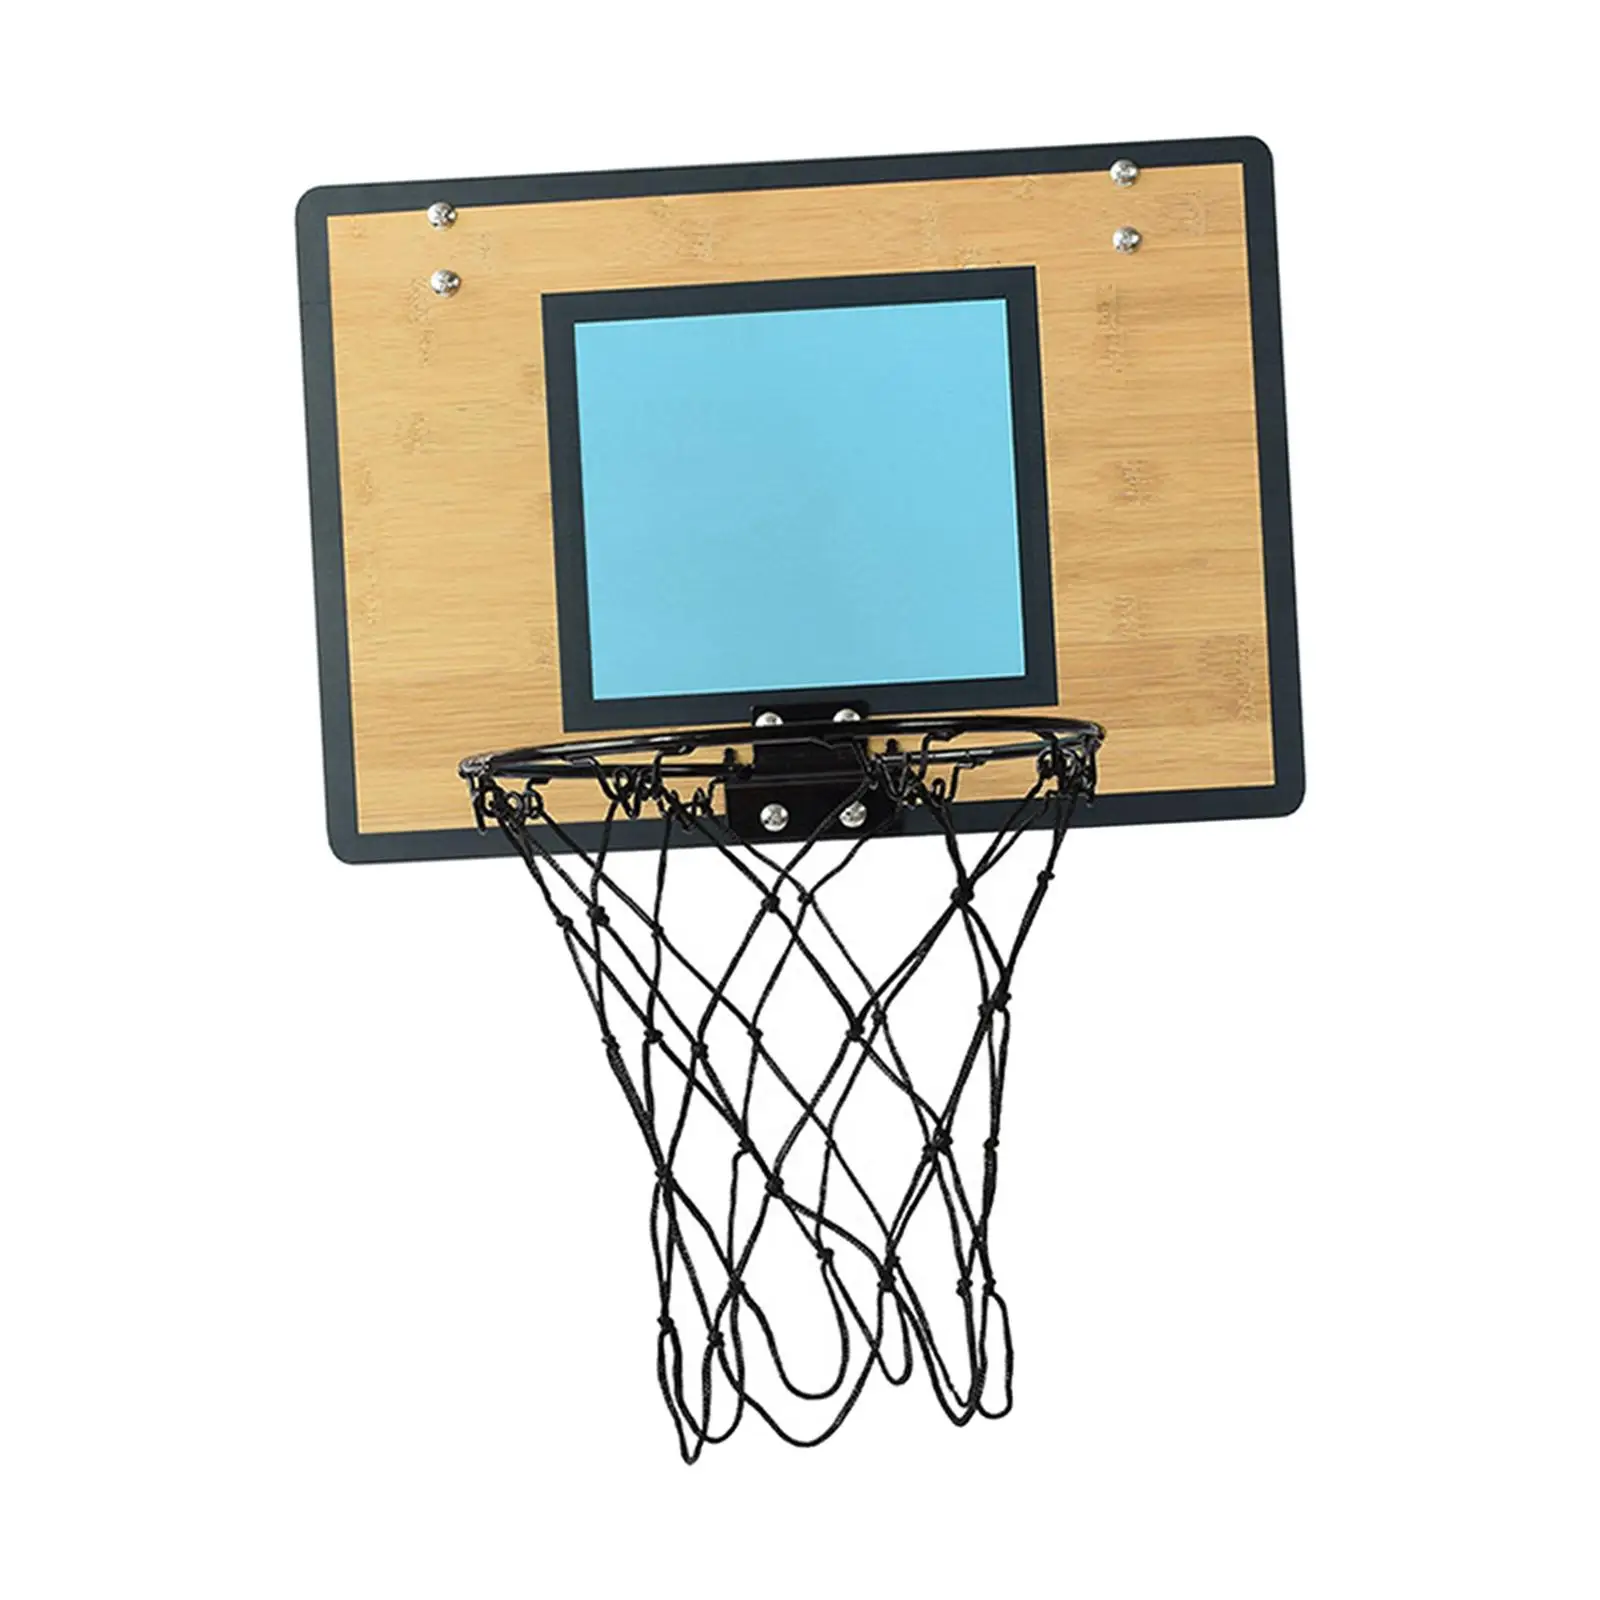 Mini Basketball Hoop Easy to Install Kids with Ball over The Door for Backyard